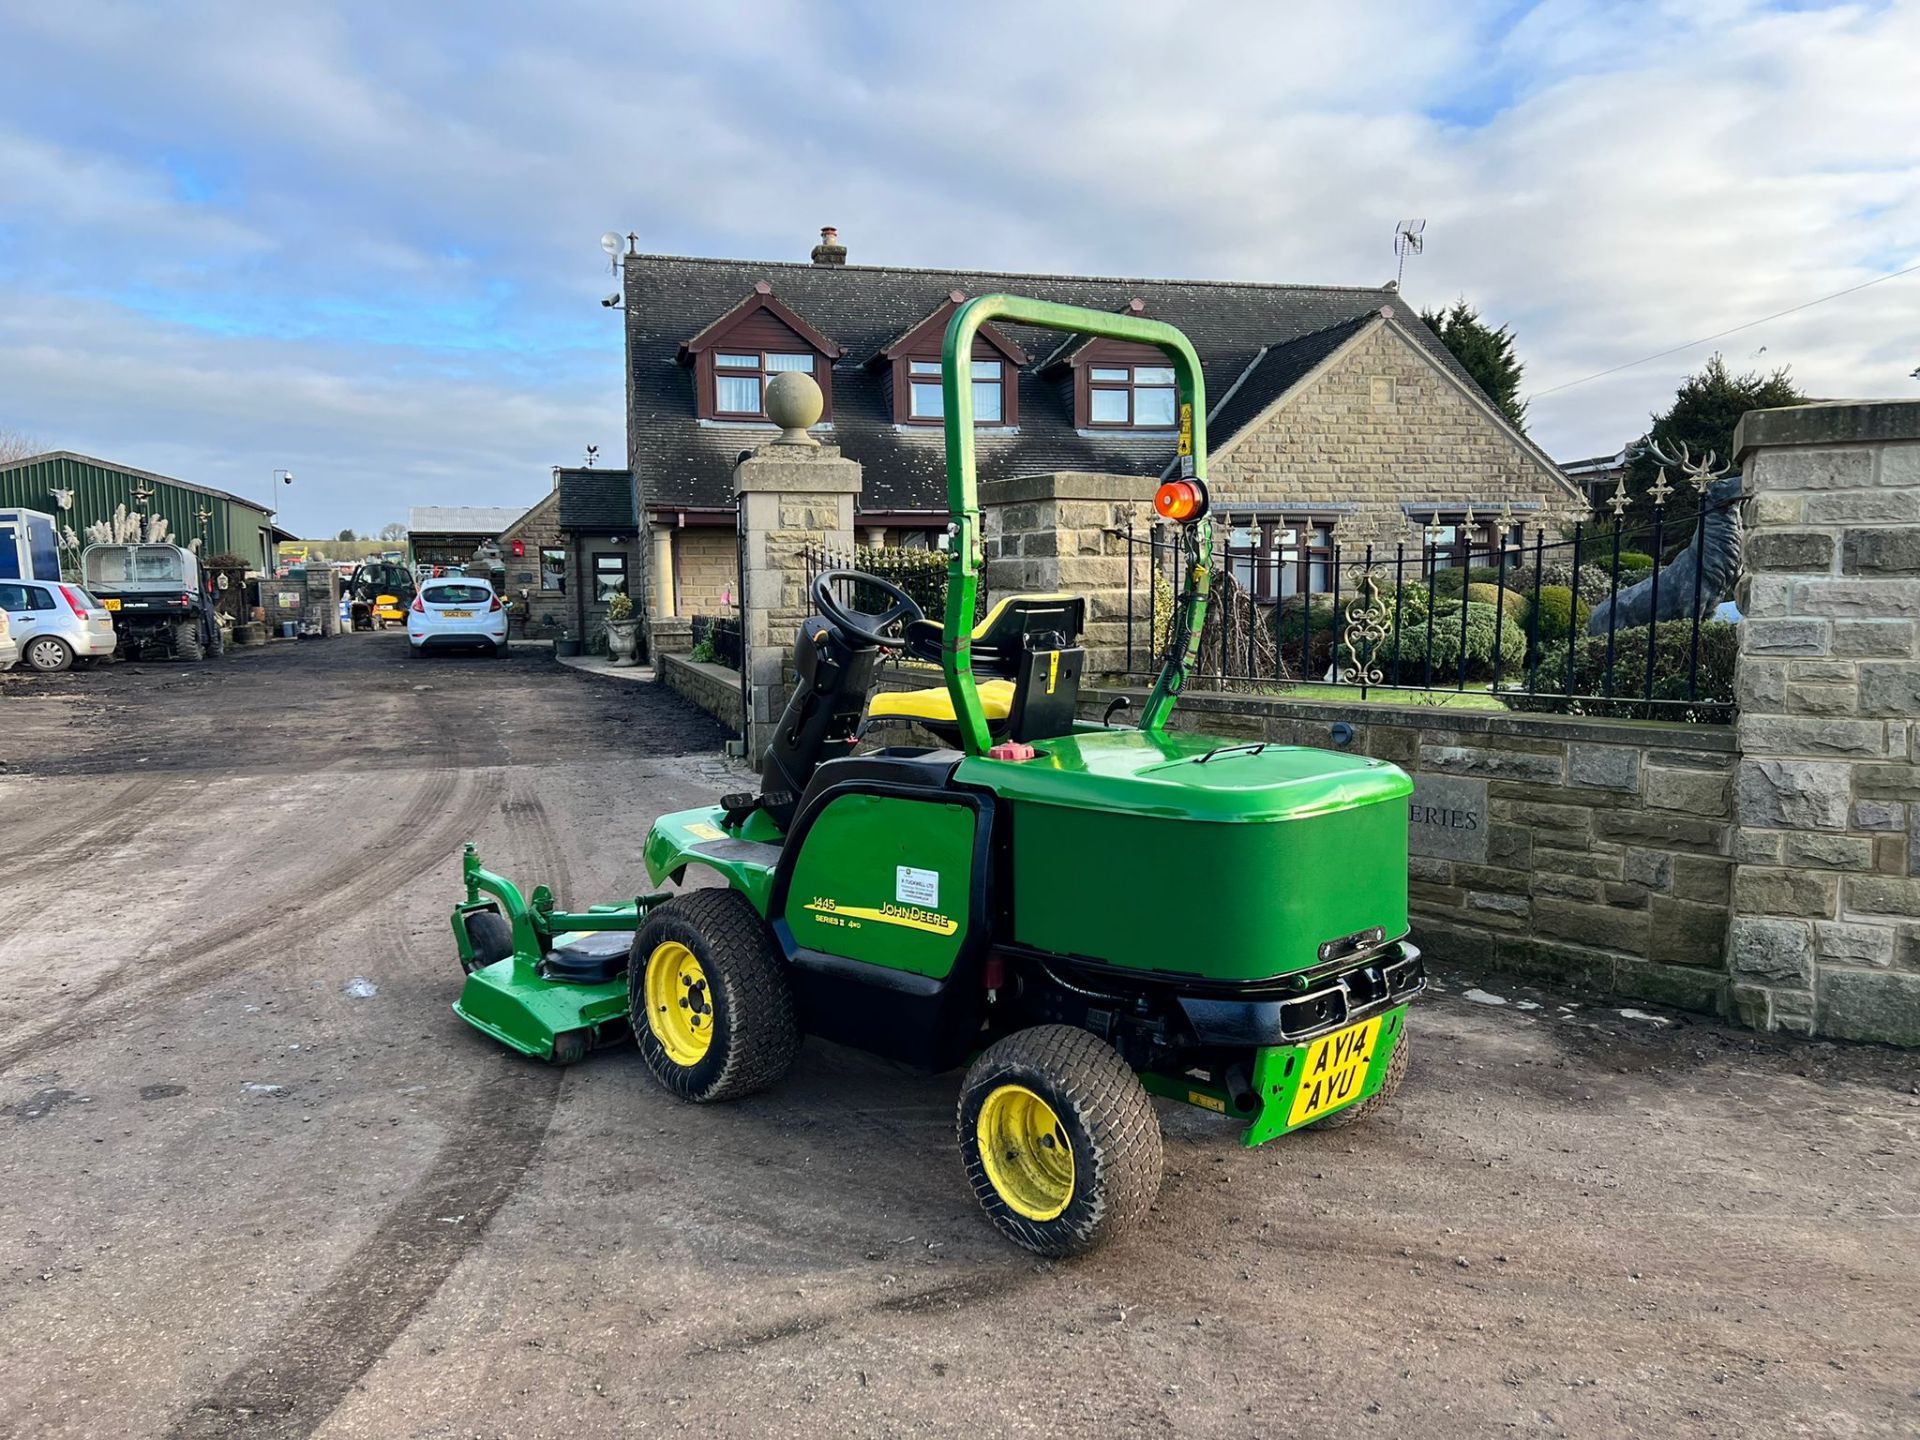 2014 JOHN DEERE 1445 4WD RIDE ON MOWER, RUNS DRIVES AND CUTS, SHOWING A LOW 2956 HOURS *PLUS VAT* - Image 4 of 10